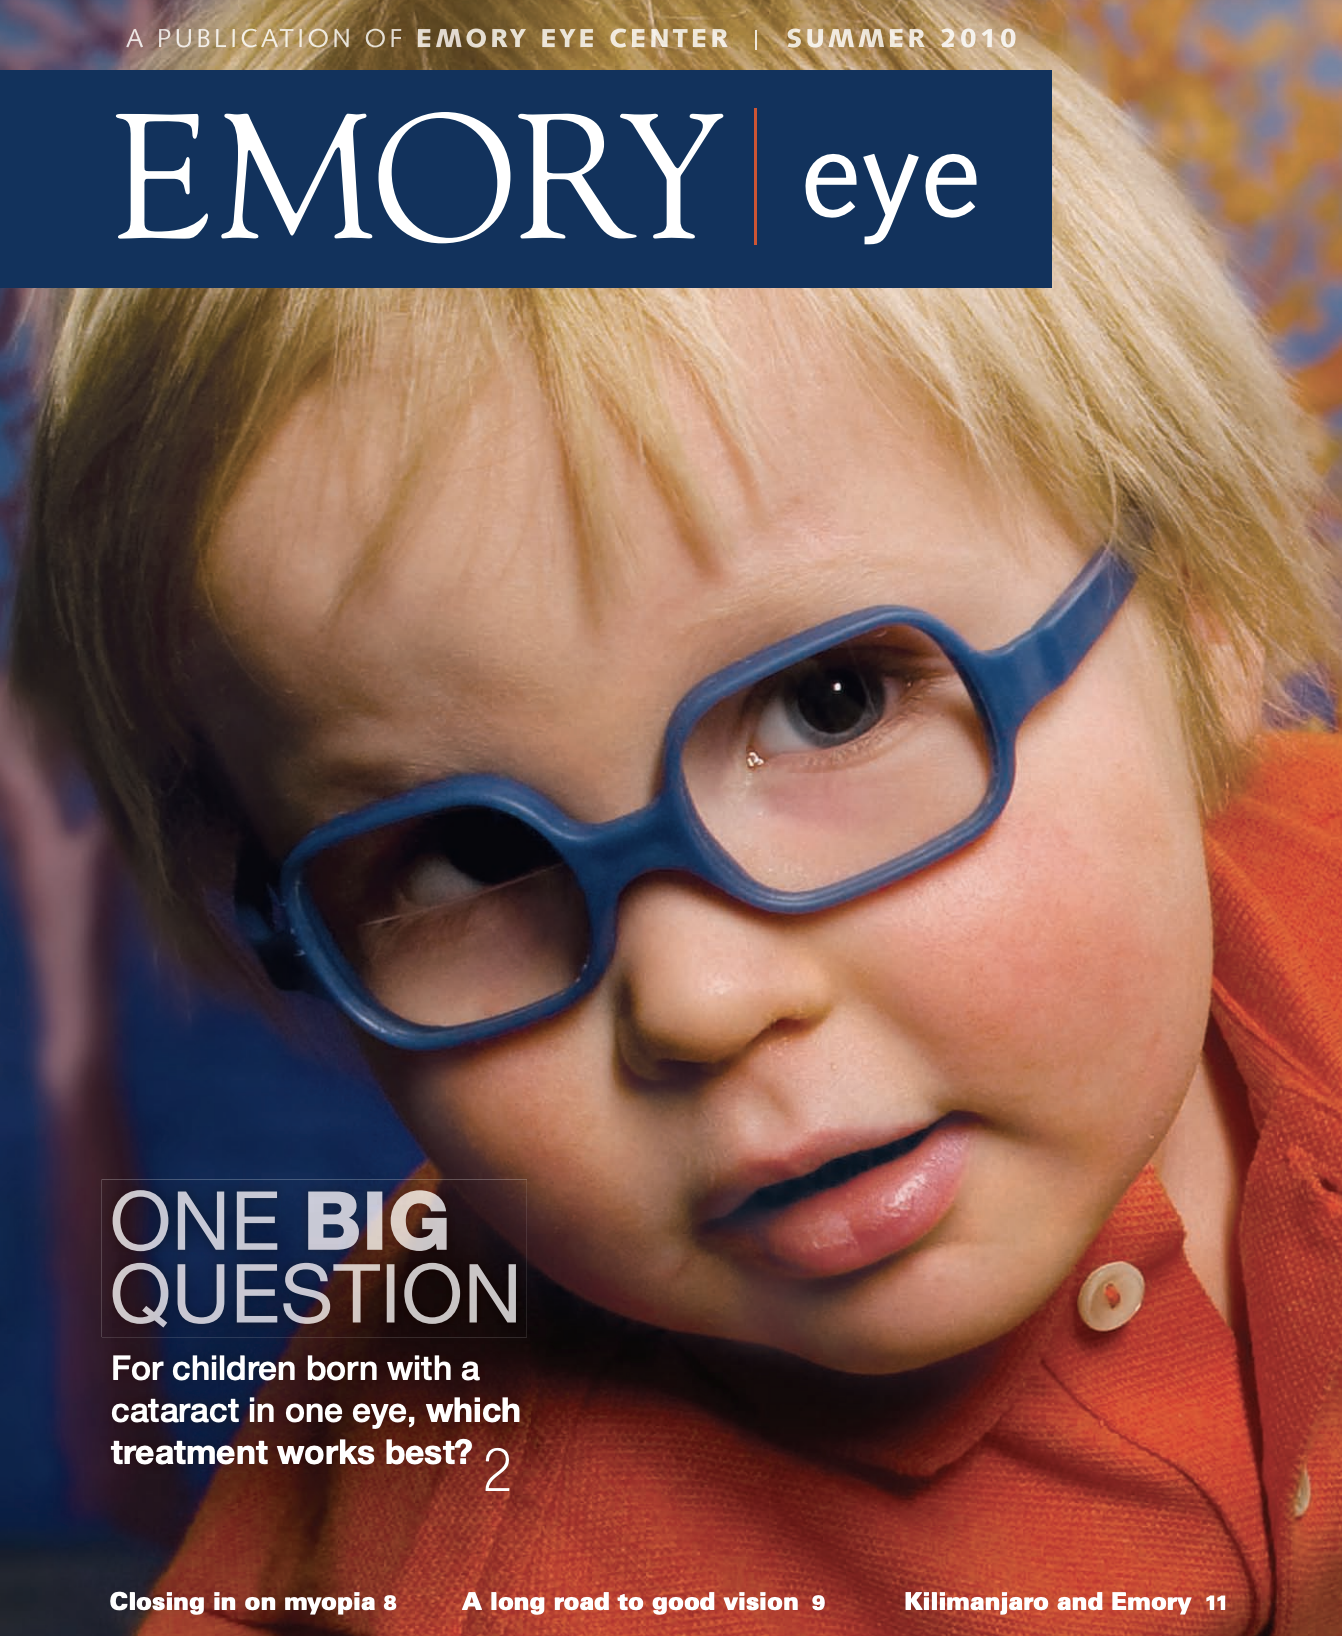 Magazine cover - a close-up photo of a toddler wearing glasses with the words "one Big Question"